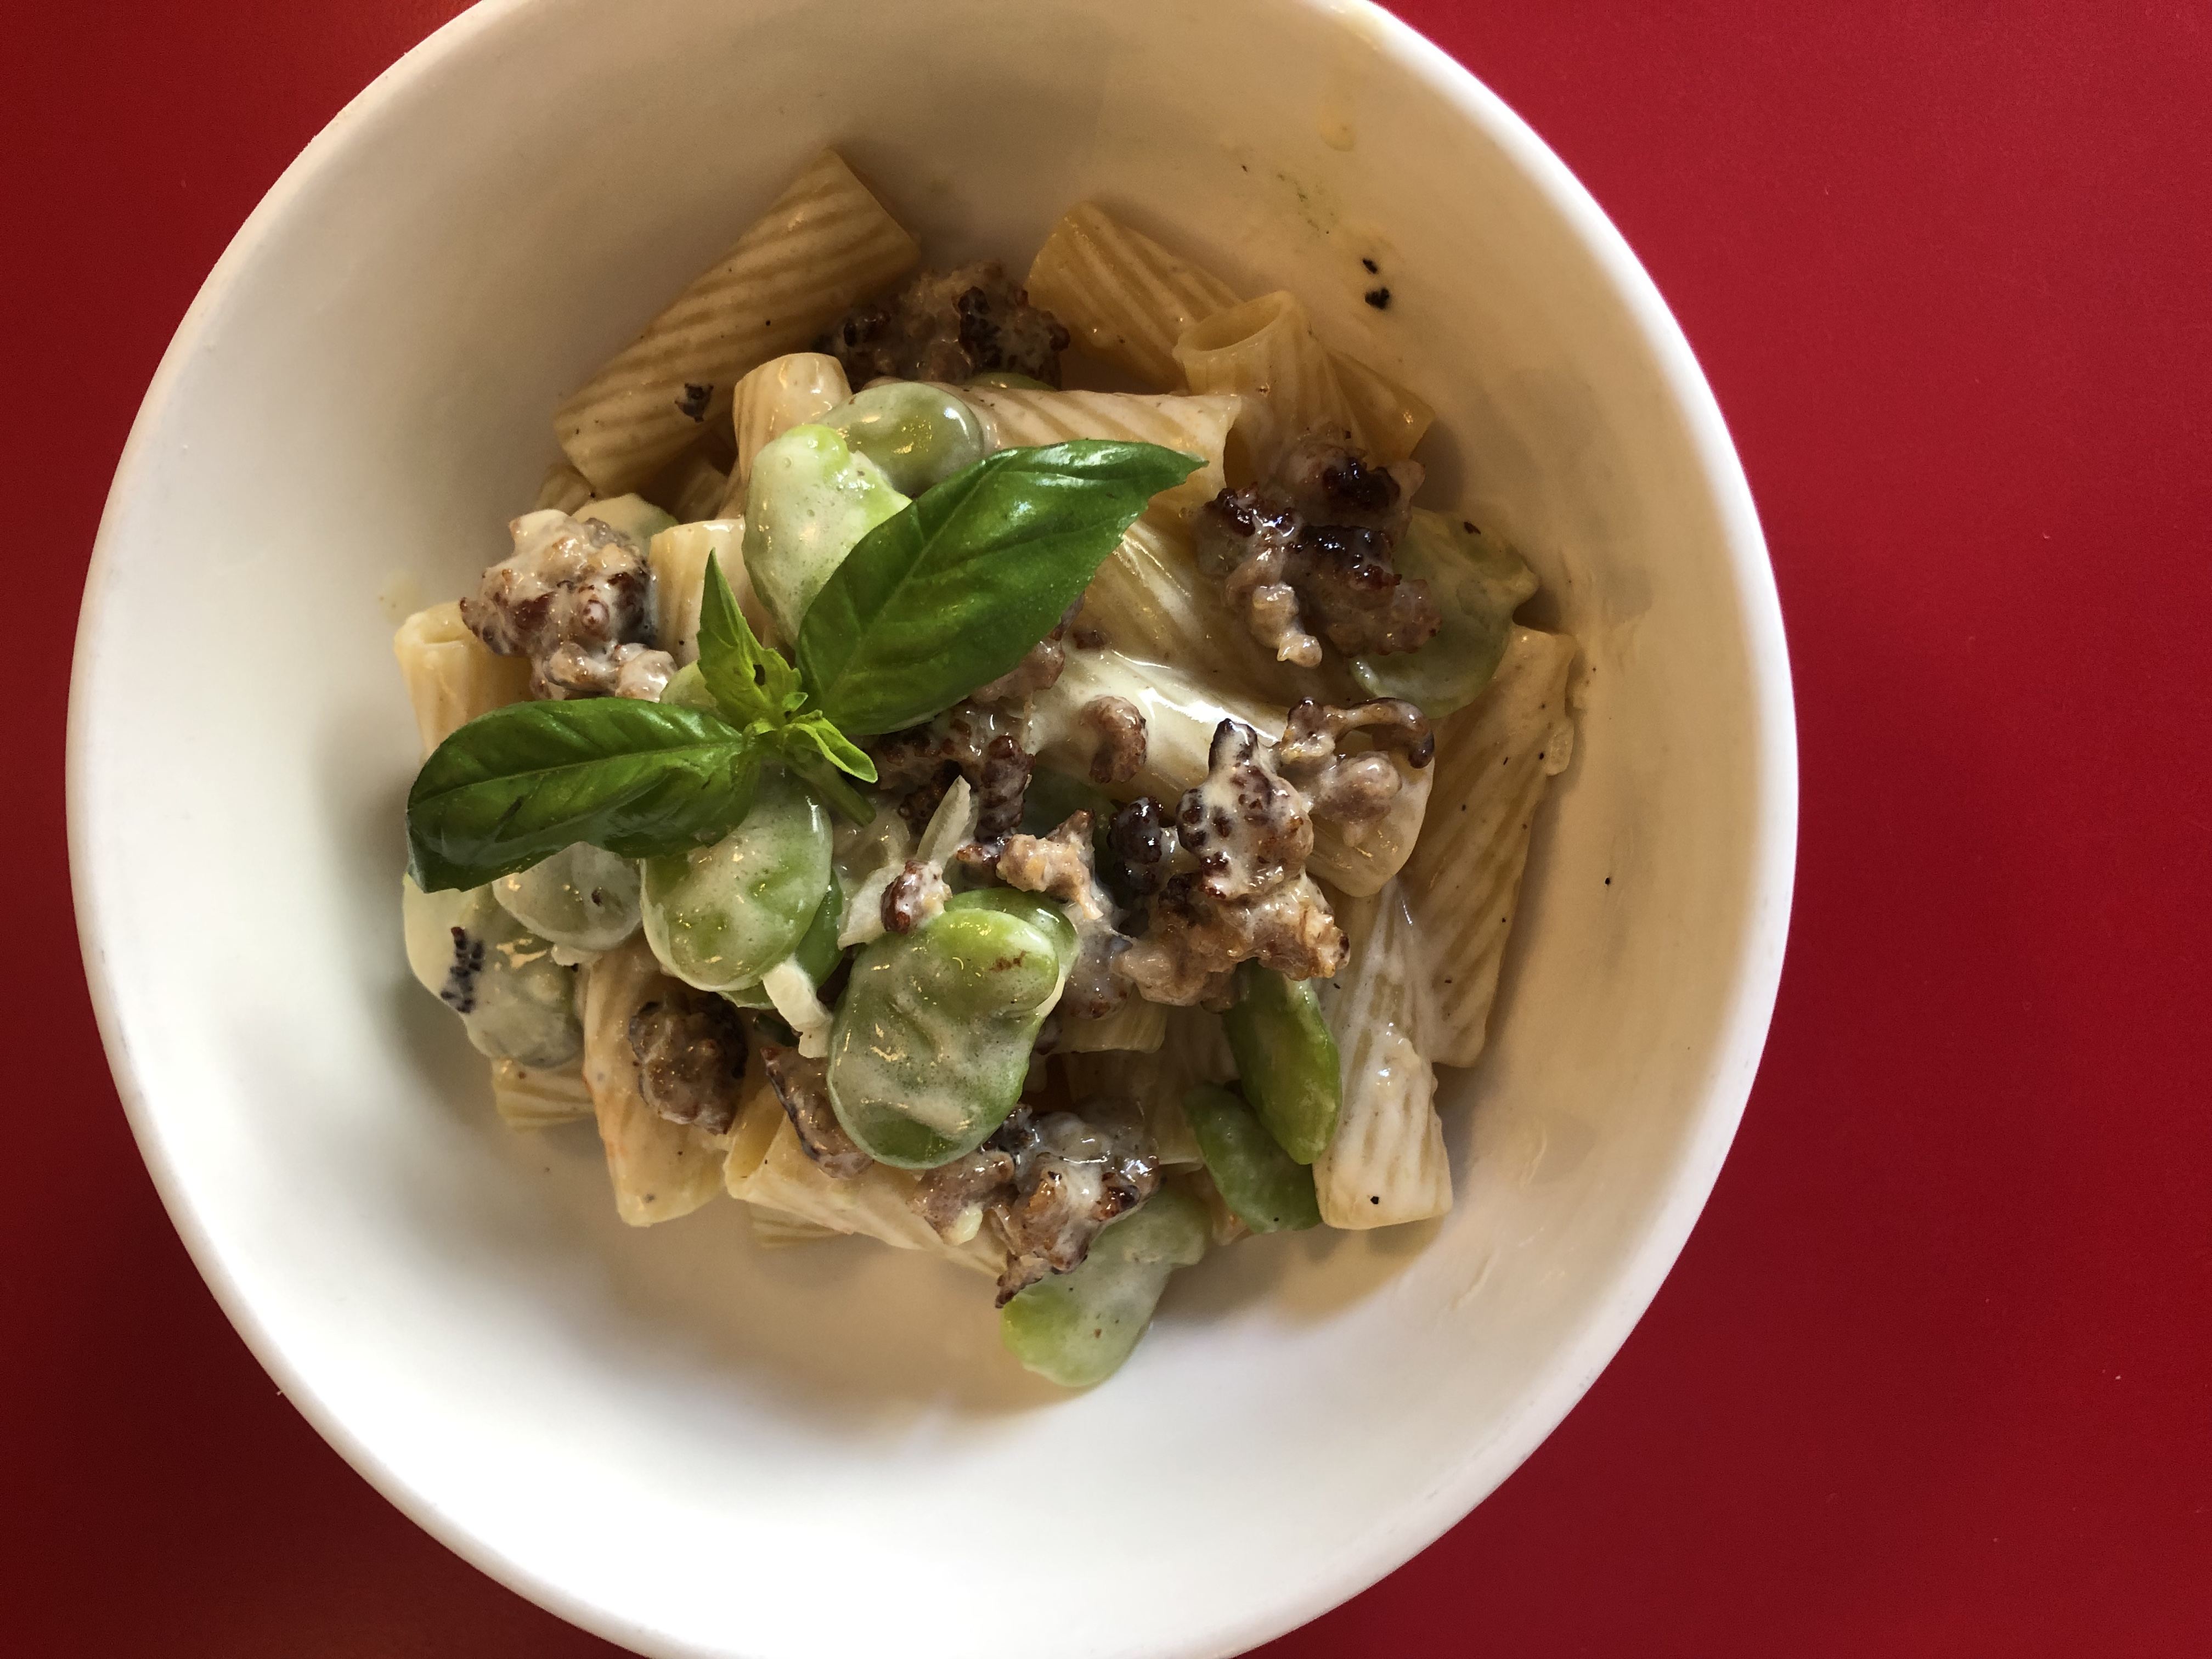 Rigatoni with Sausage Cream and fava beans.